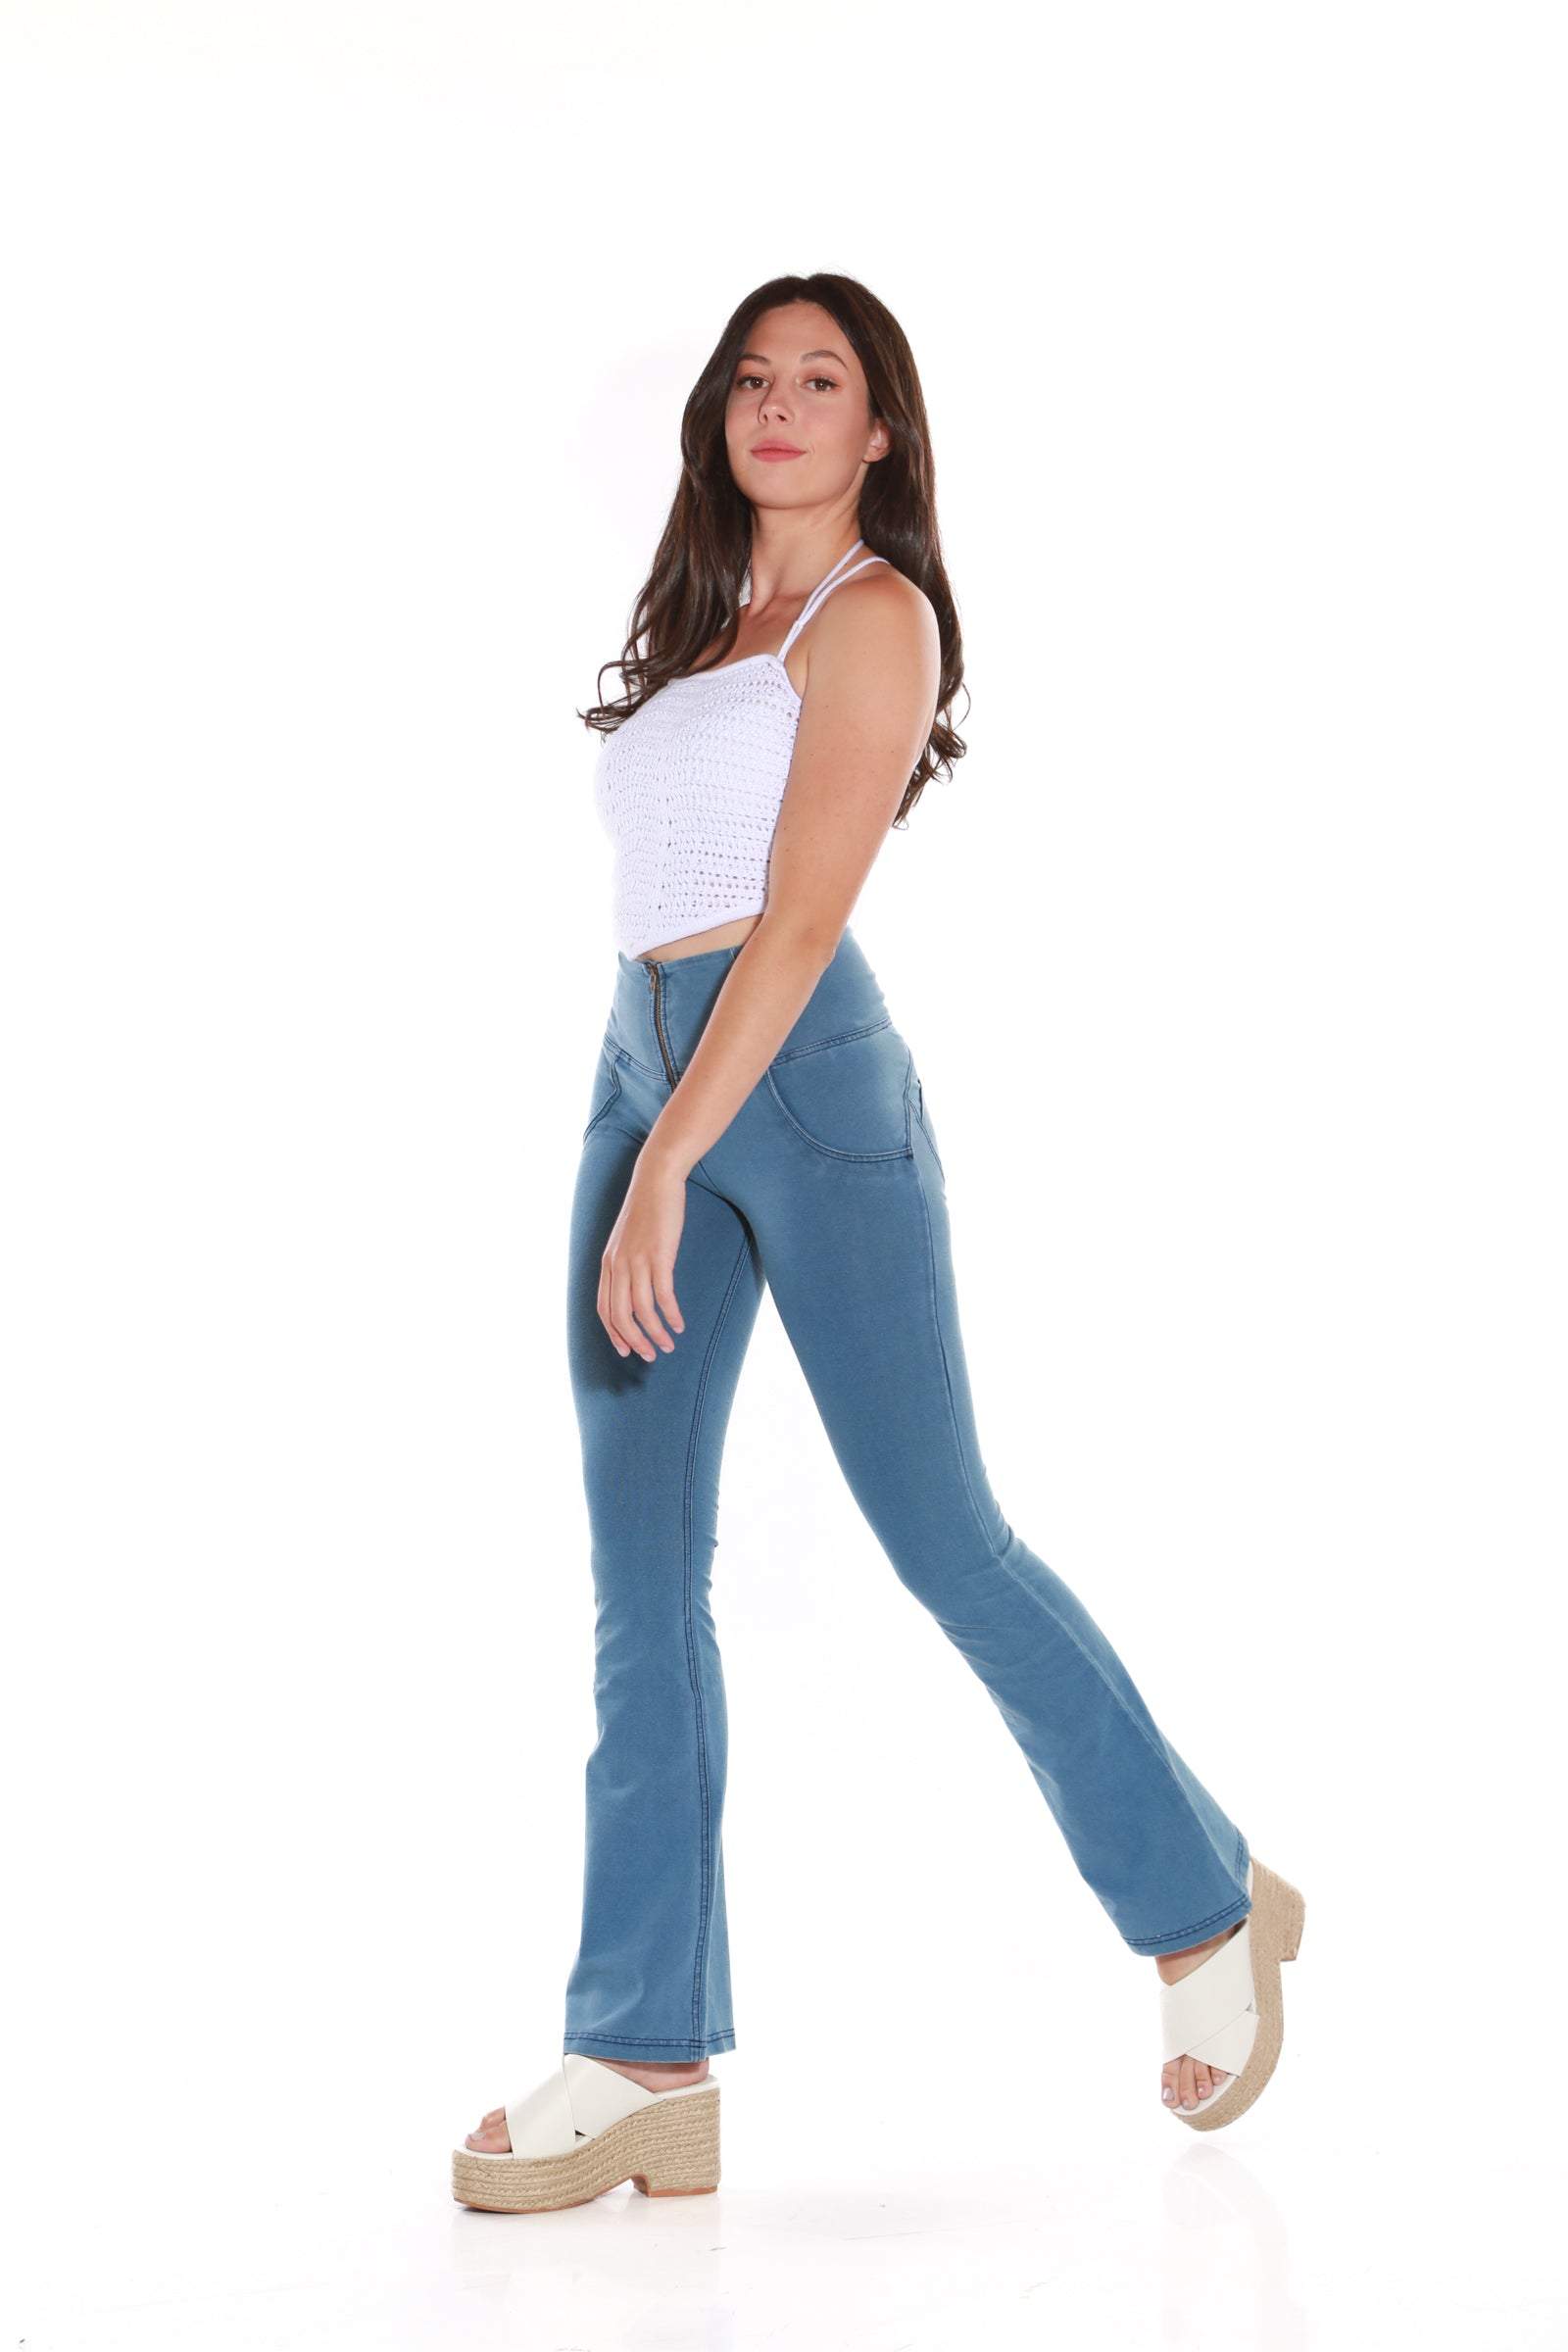 Image of High waist Bootleg Butt lifting Flare Shaping jeans/Jeggings - Light Blue